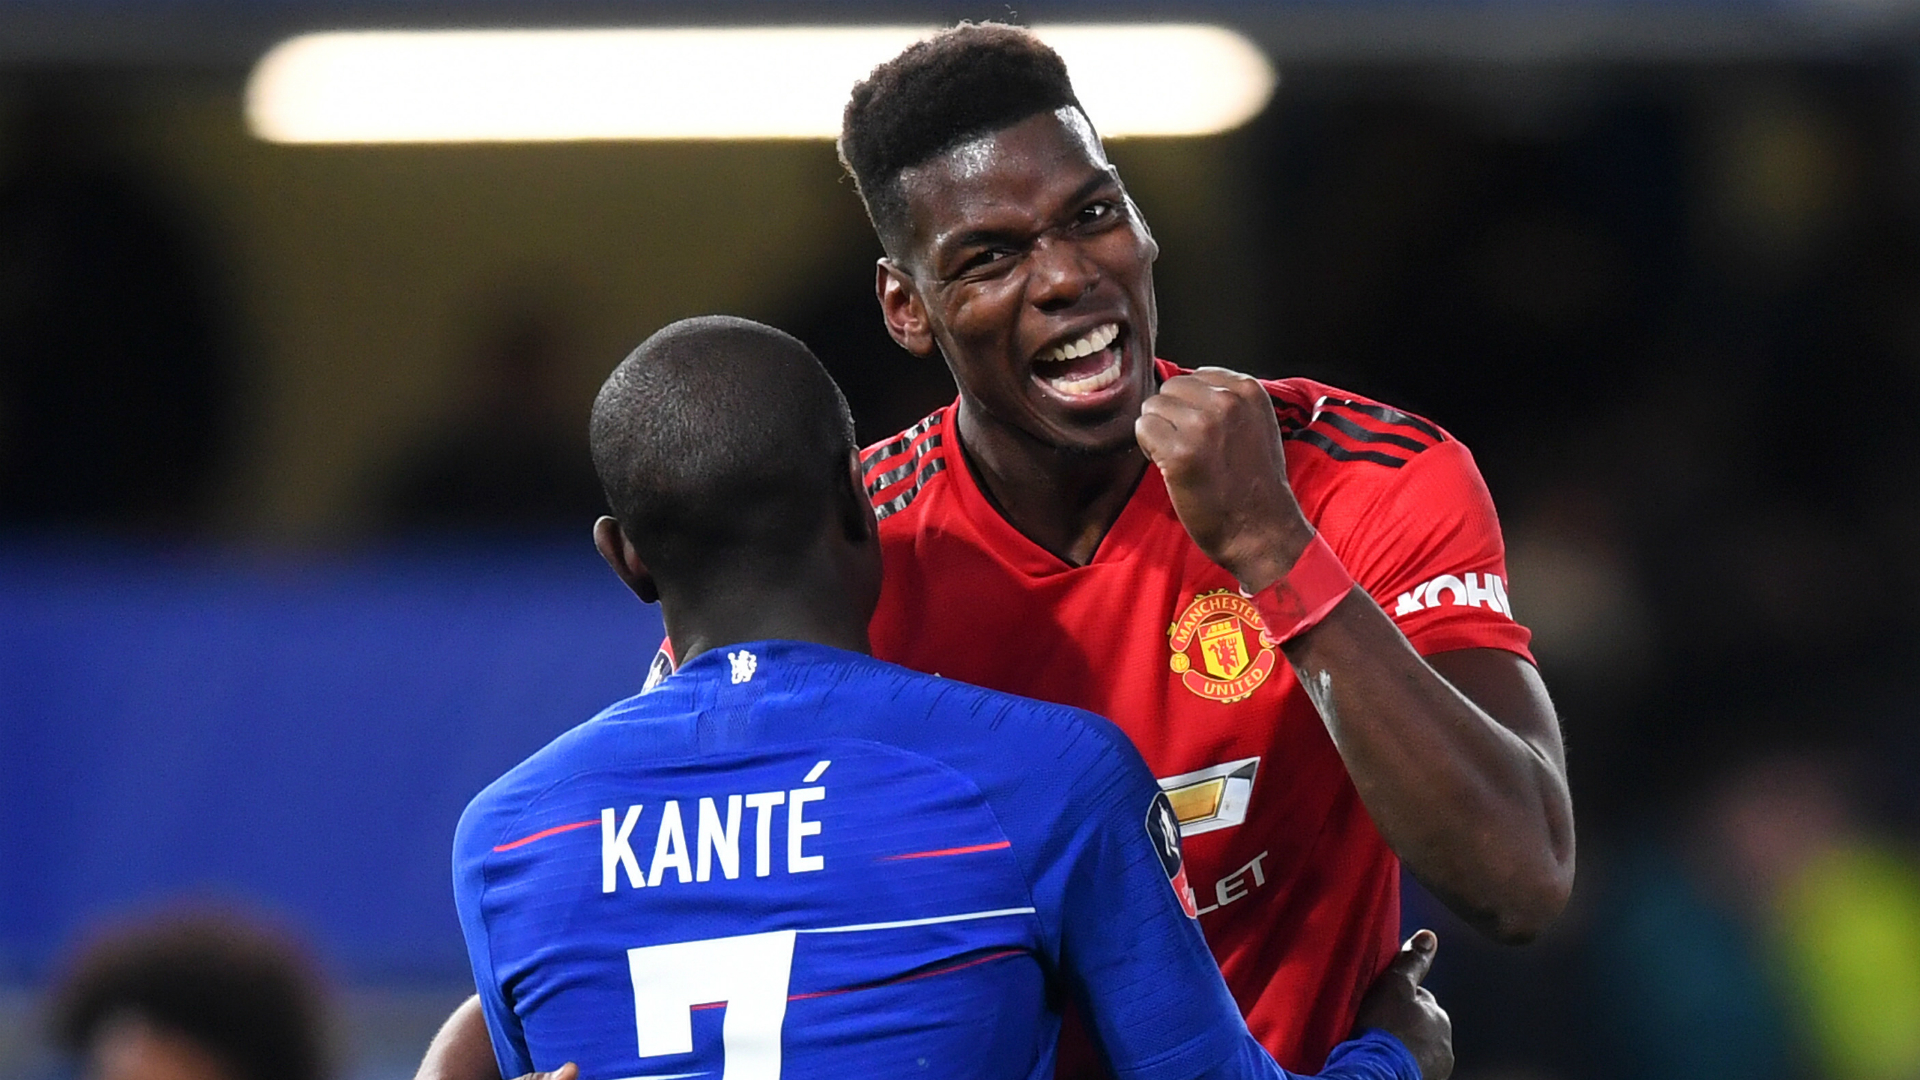 Paul Pogba earned more praise from Ole Gunnar Solskjaer following his man-of-the-match display against Chelsea in the FA Cup.